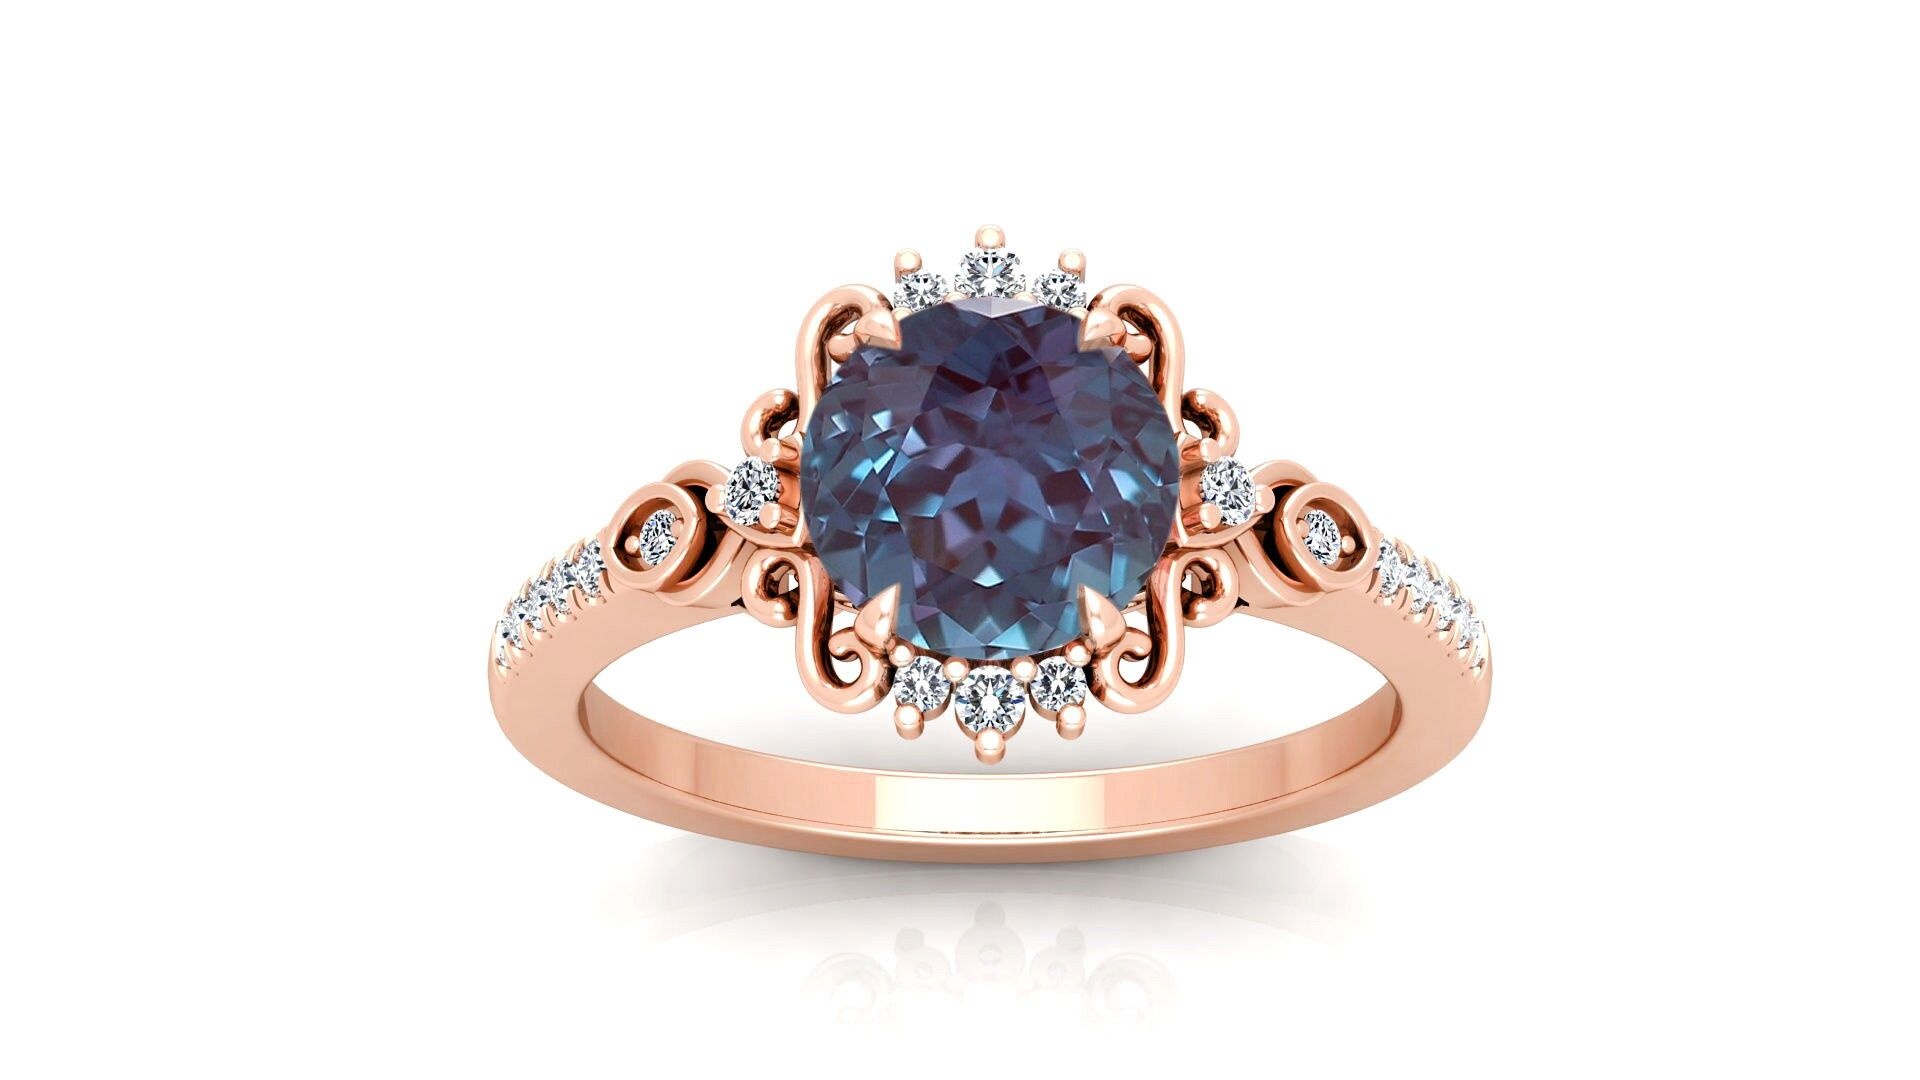 Lab-created alexandrite, Bridal moissanite ring, Nature-inspired jewelry, Color change stone, 1920x1080 Full HD Desktop